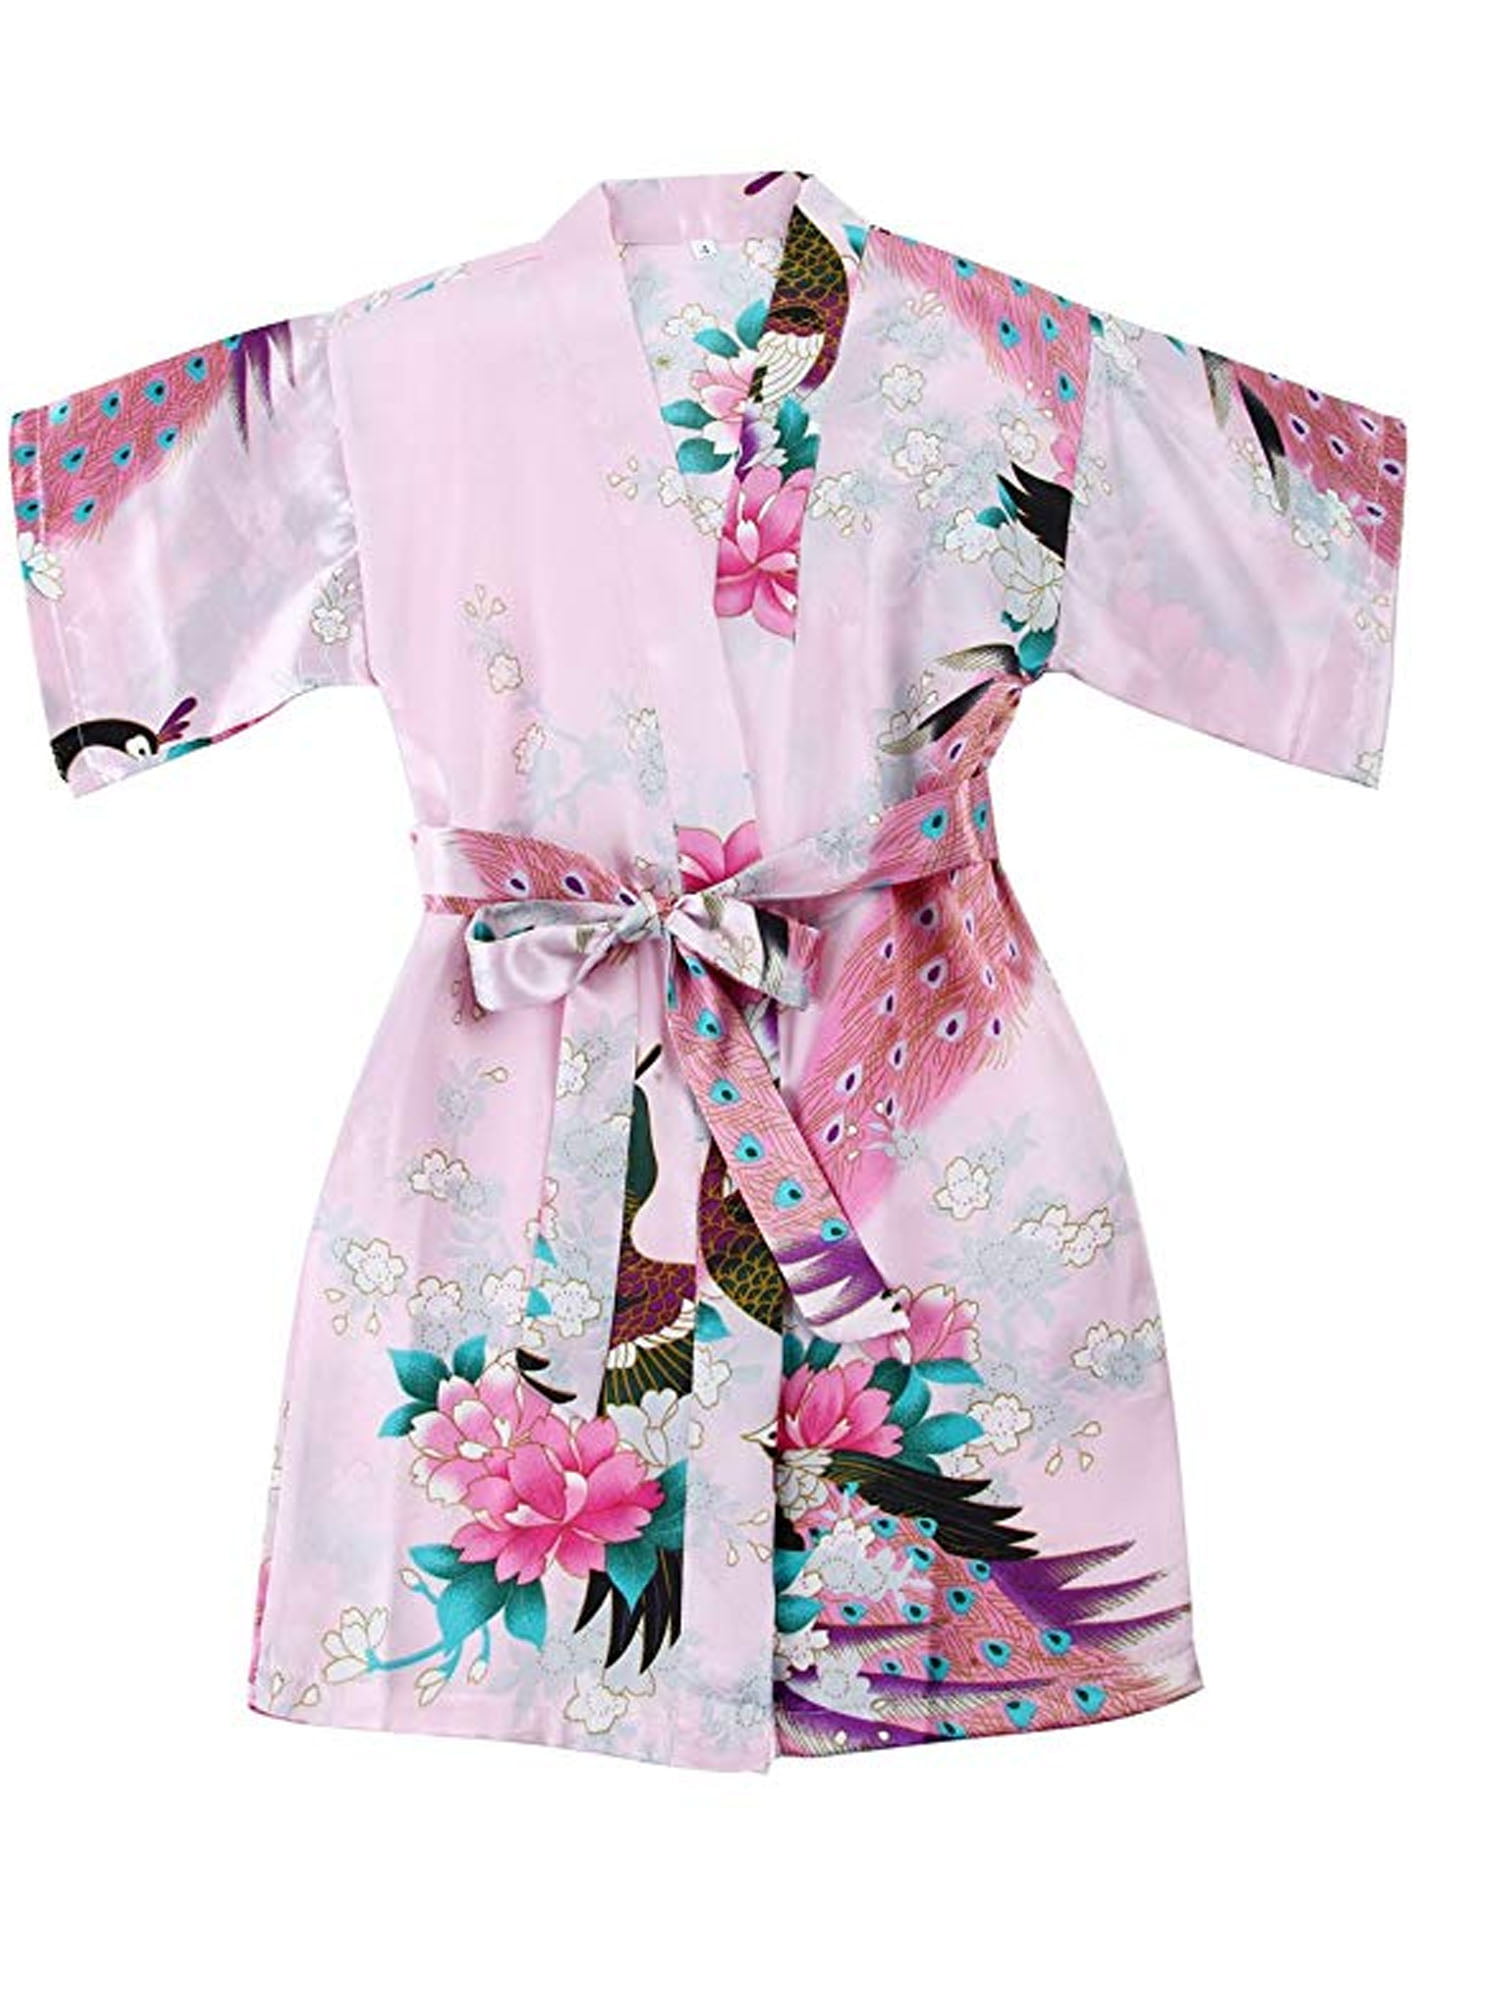 Girls Floral Satin Robes for Spa Party Flower Girl Robes Toddler Wedding Silk Robes 